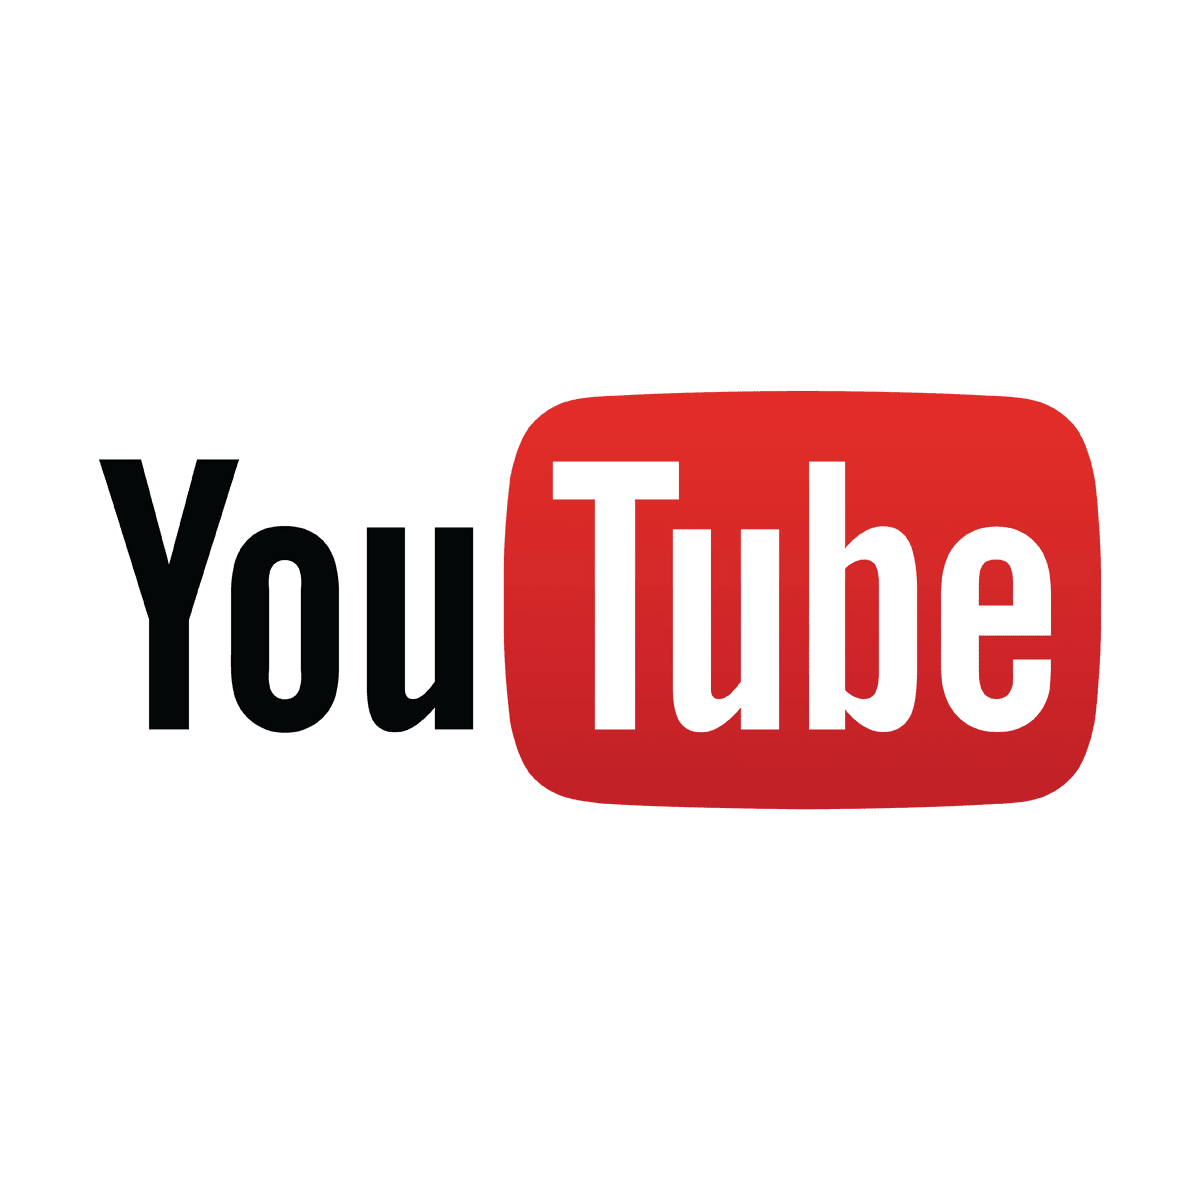 Find me on YOUTUBE